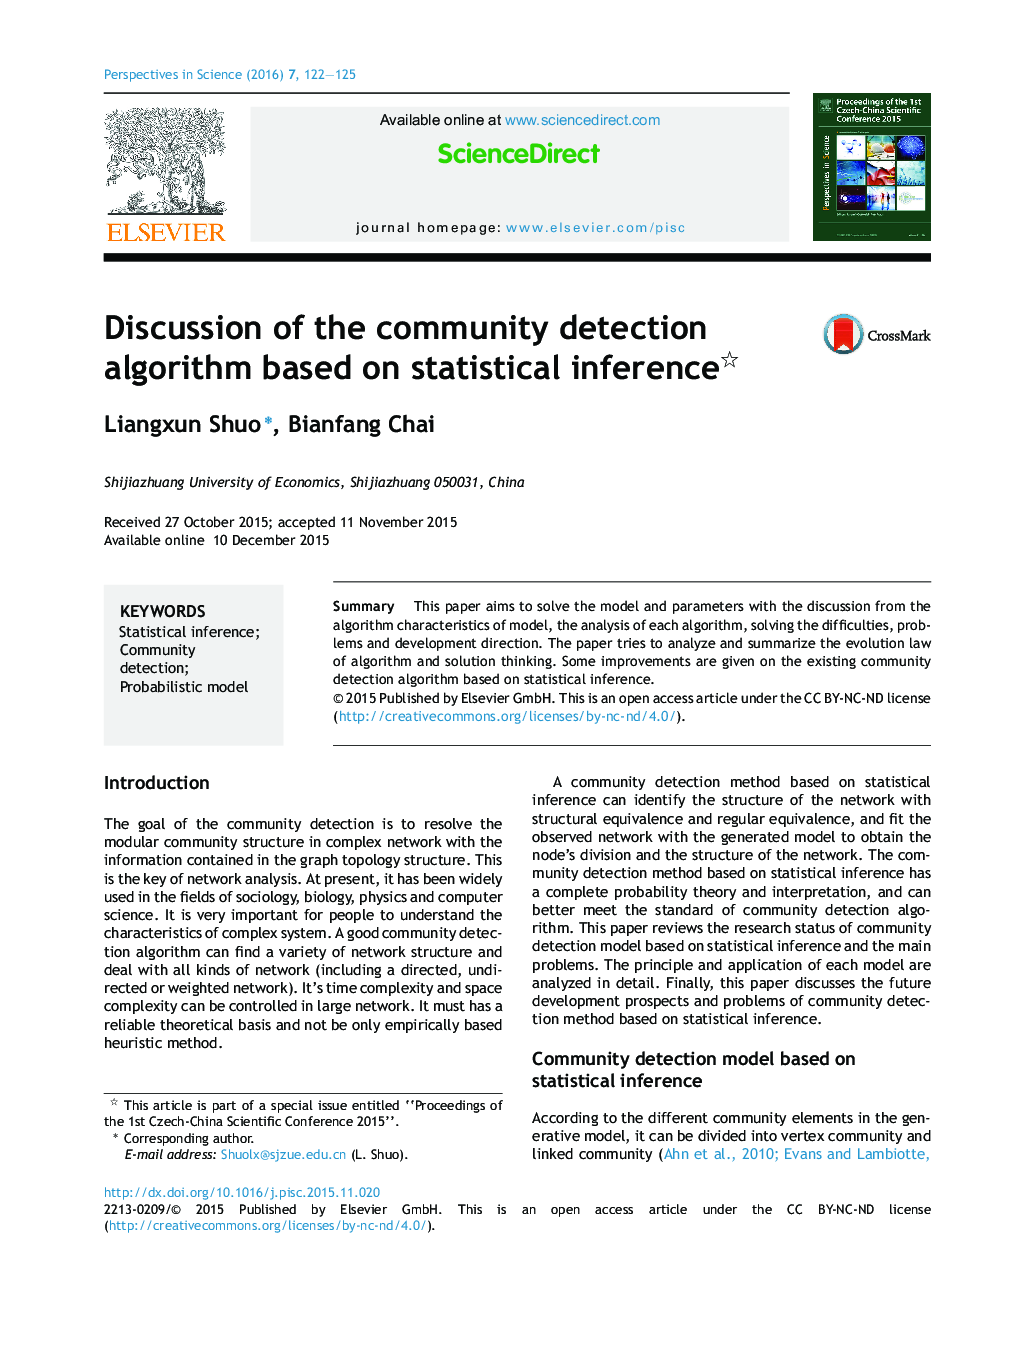 Discussion of the community detection algorithm based on statistical inference 